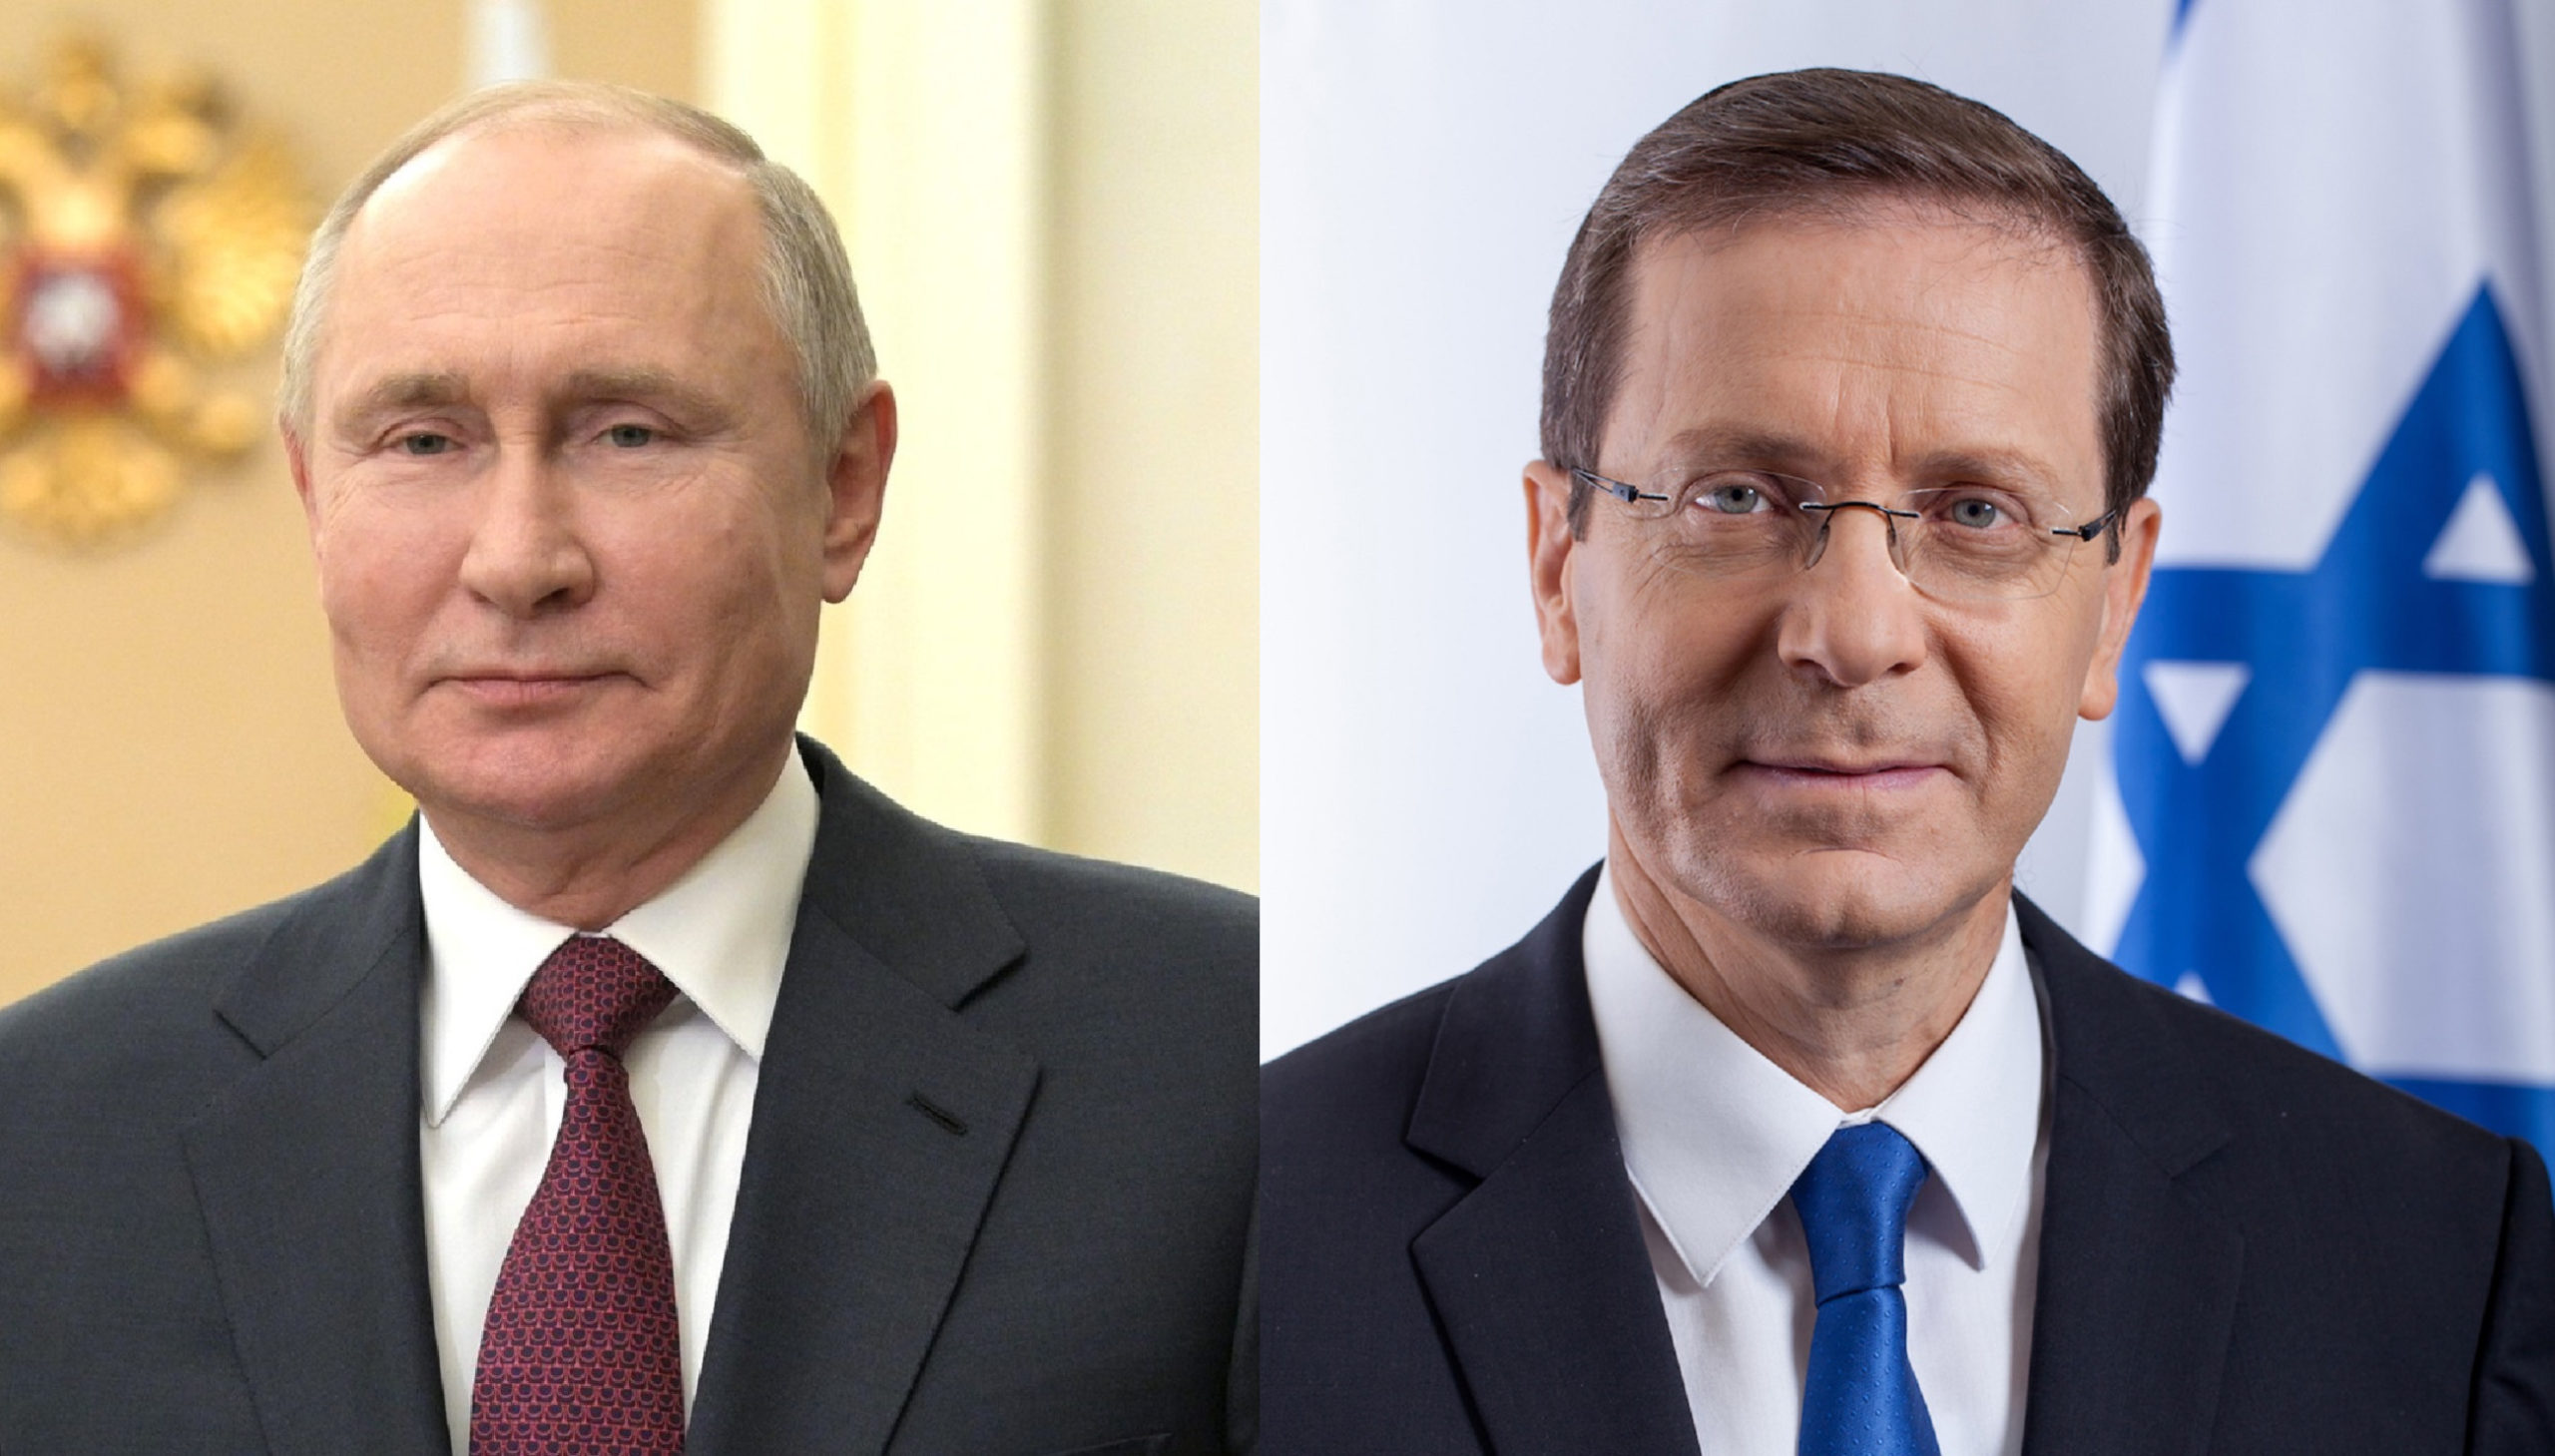 Russian, Israeli Presidents Discuss Relations, Jewish Agency in Call